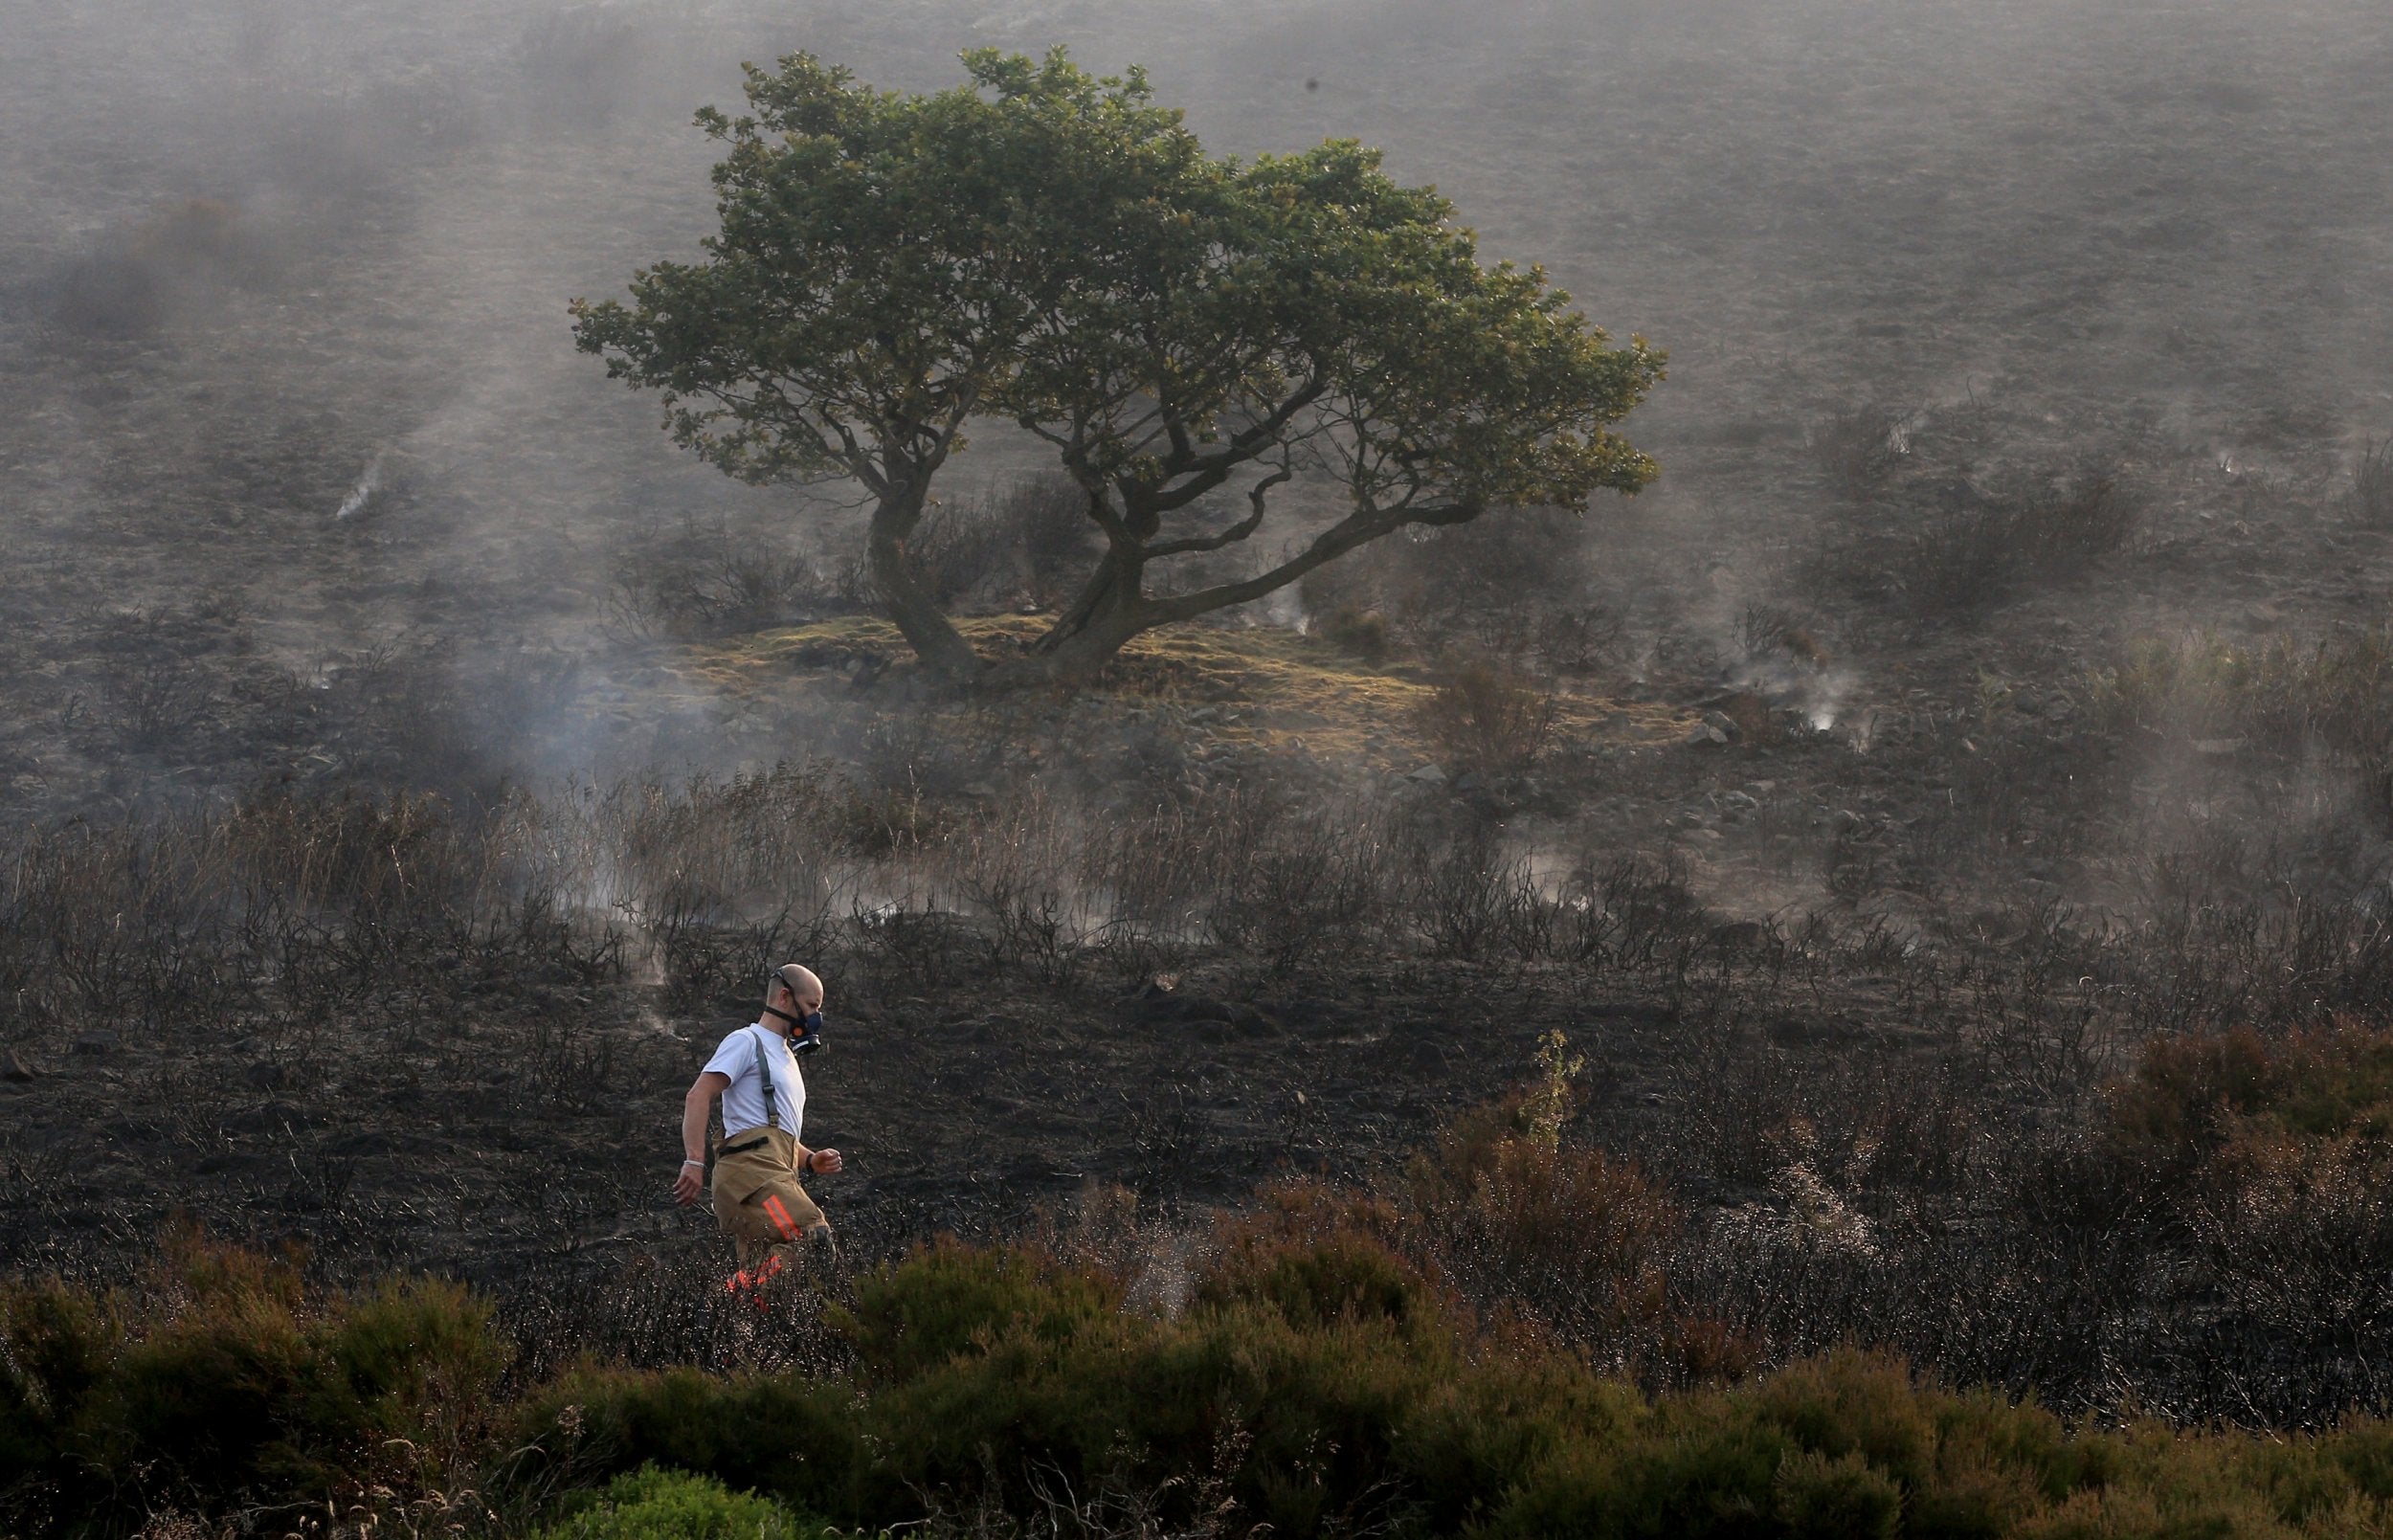 Firefighters tackle the wildfire on Saddleworth Moor, which continues to spread after the blaze was declared a major incident by Greater Manchester Police